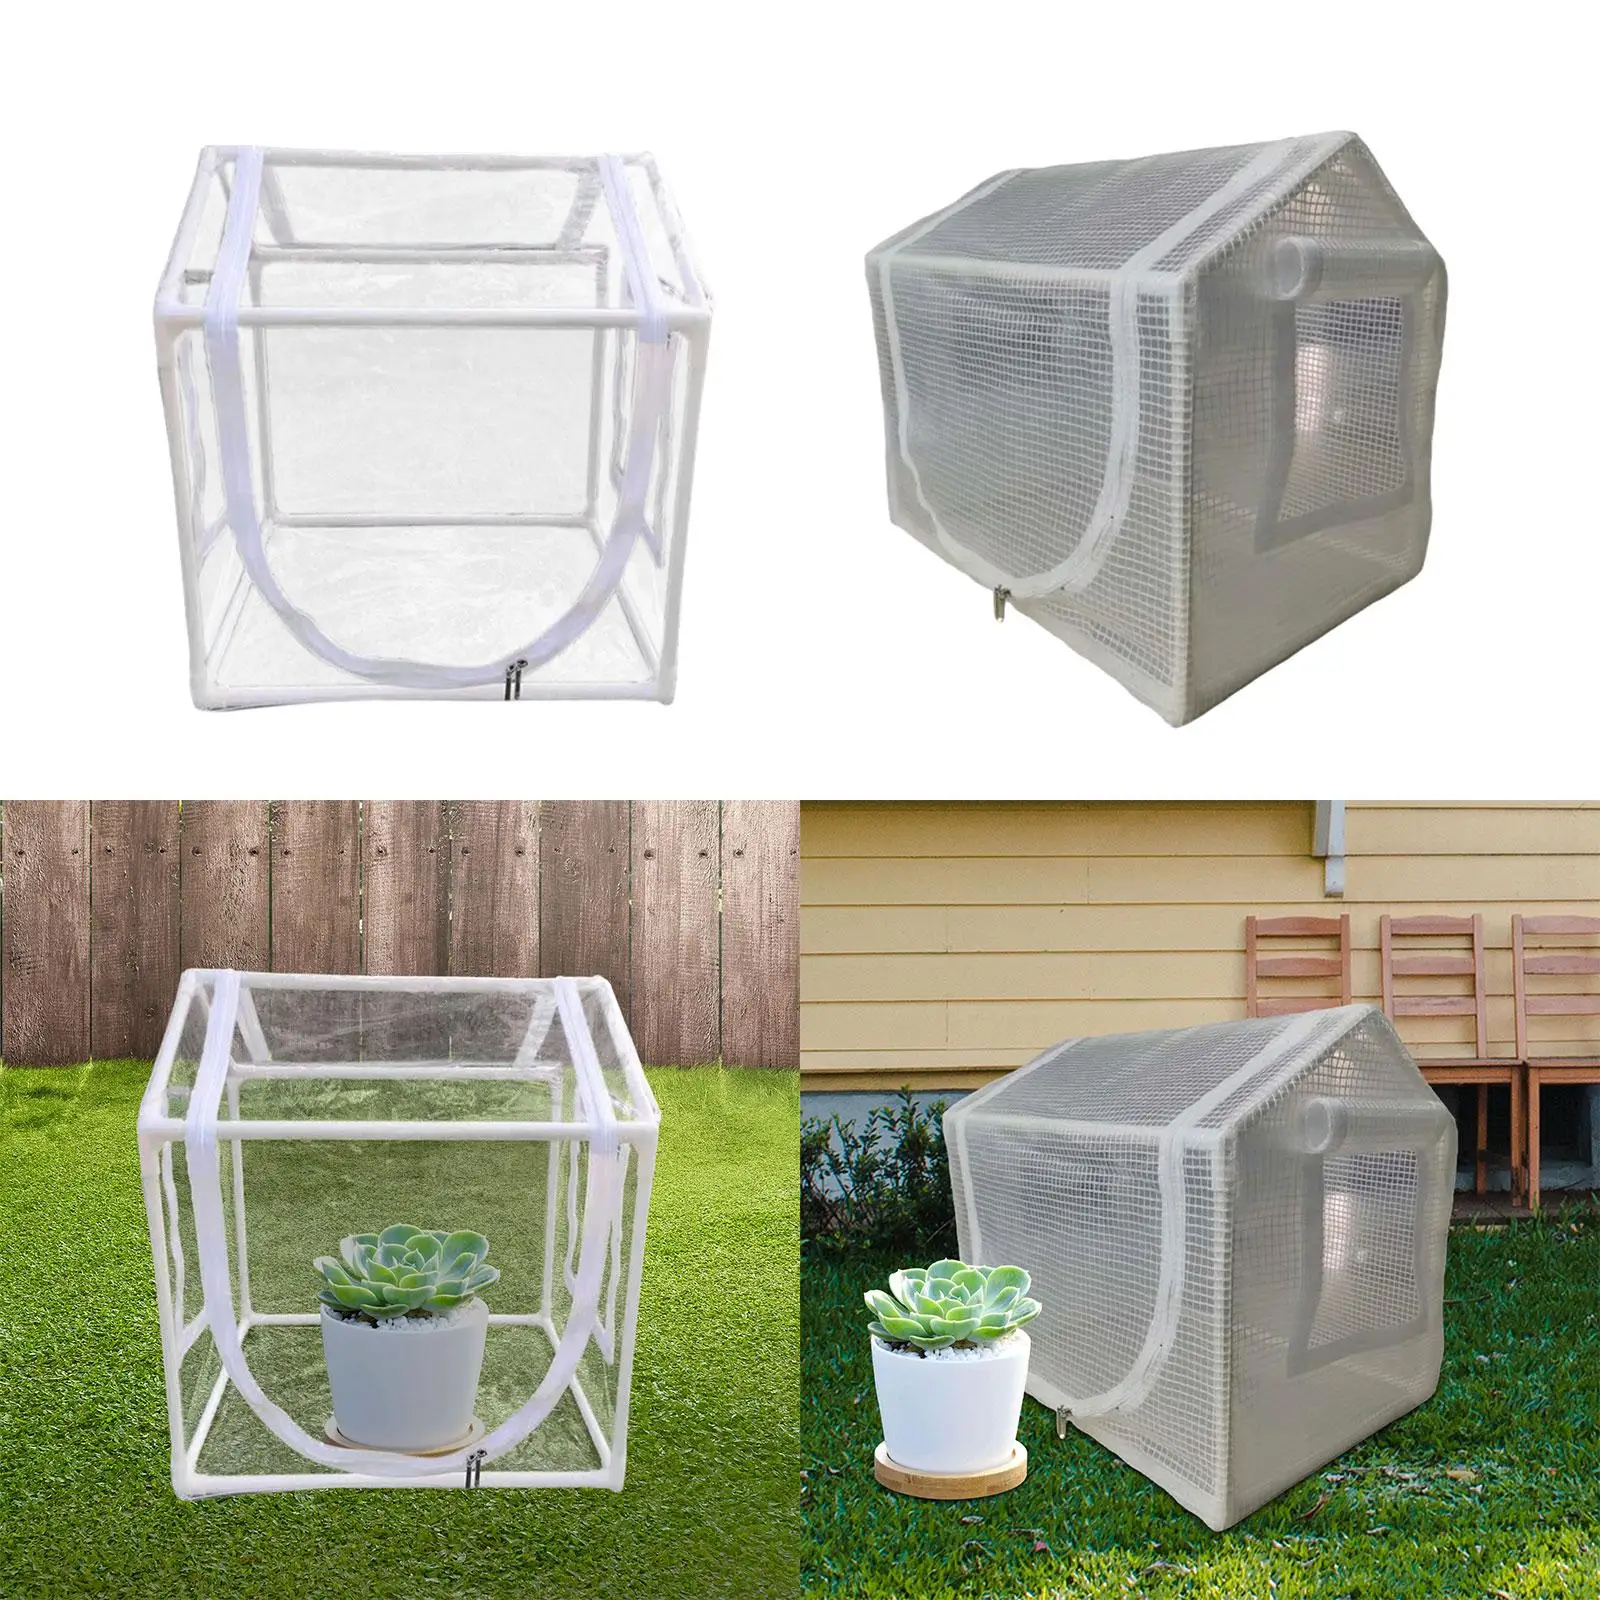 Still Air Box Mushrooms Growing Tent Yard Durable for Cold Frost Protector Garden Reusable PVC Indoor Outdoor Mini Greenhouse